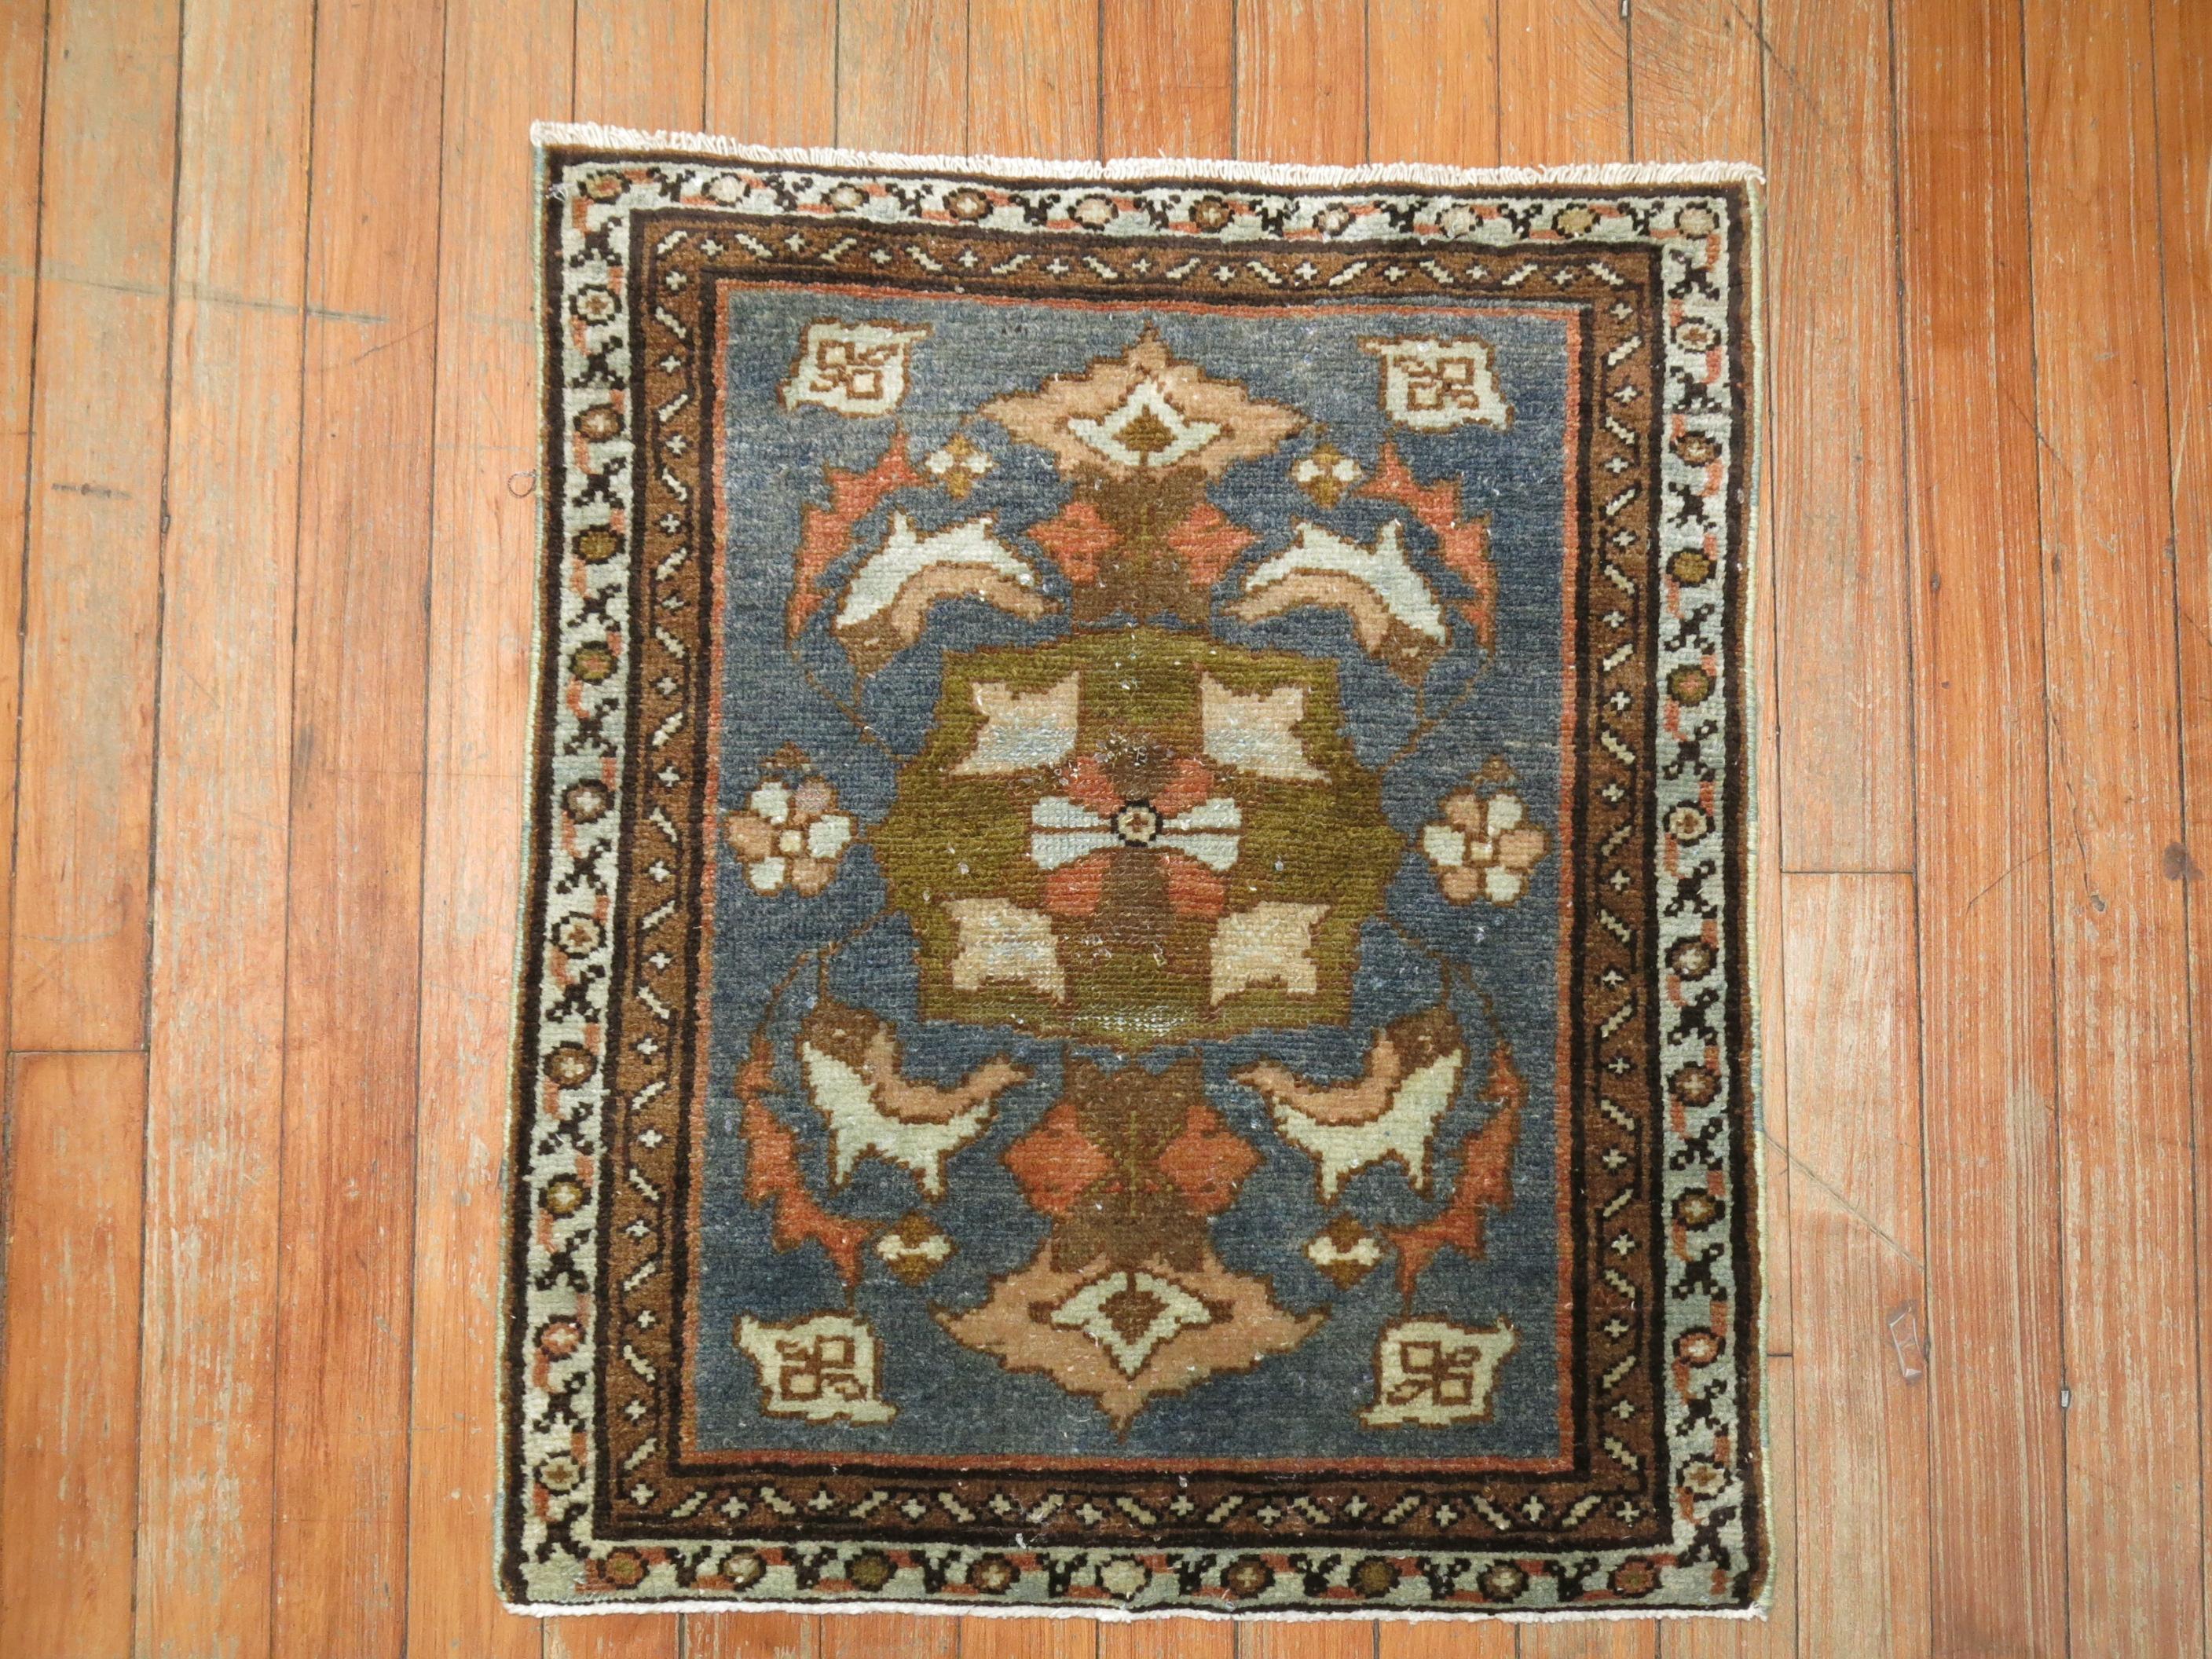 Mat size Persian Malayer rug from the early stages of the 20th century.

Measures: 1'9